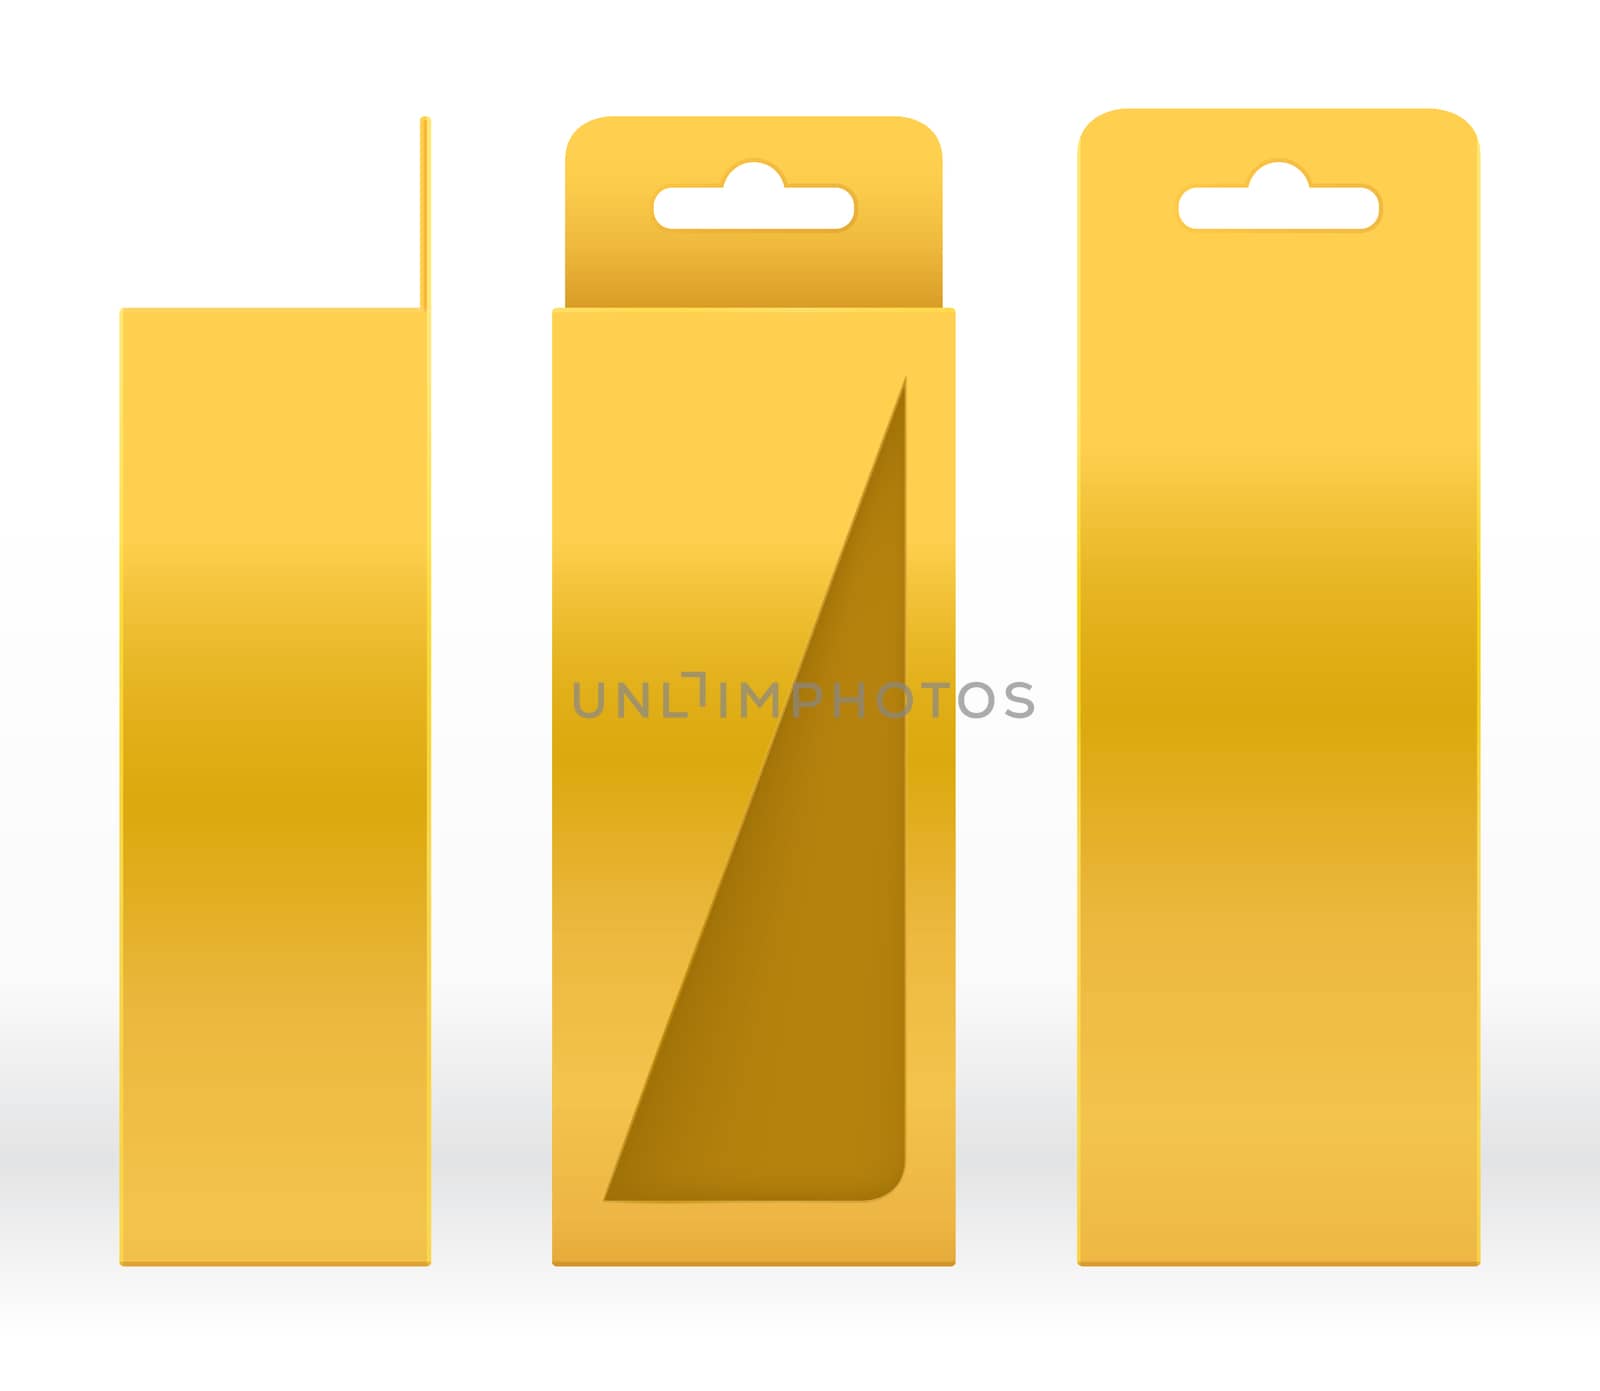 Hanging Box Gold window shape cut out Packaging Template blank. Luxury Empty Box Golden Template for design product package gift box, Gold Box packaging paper kraft cardboard package by cgdeaw